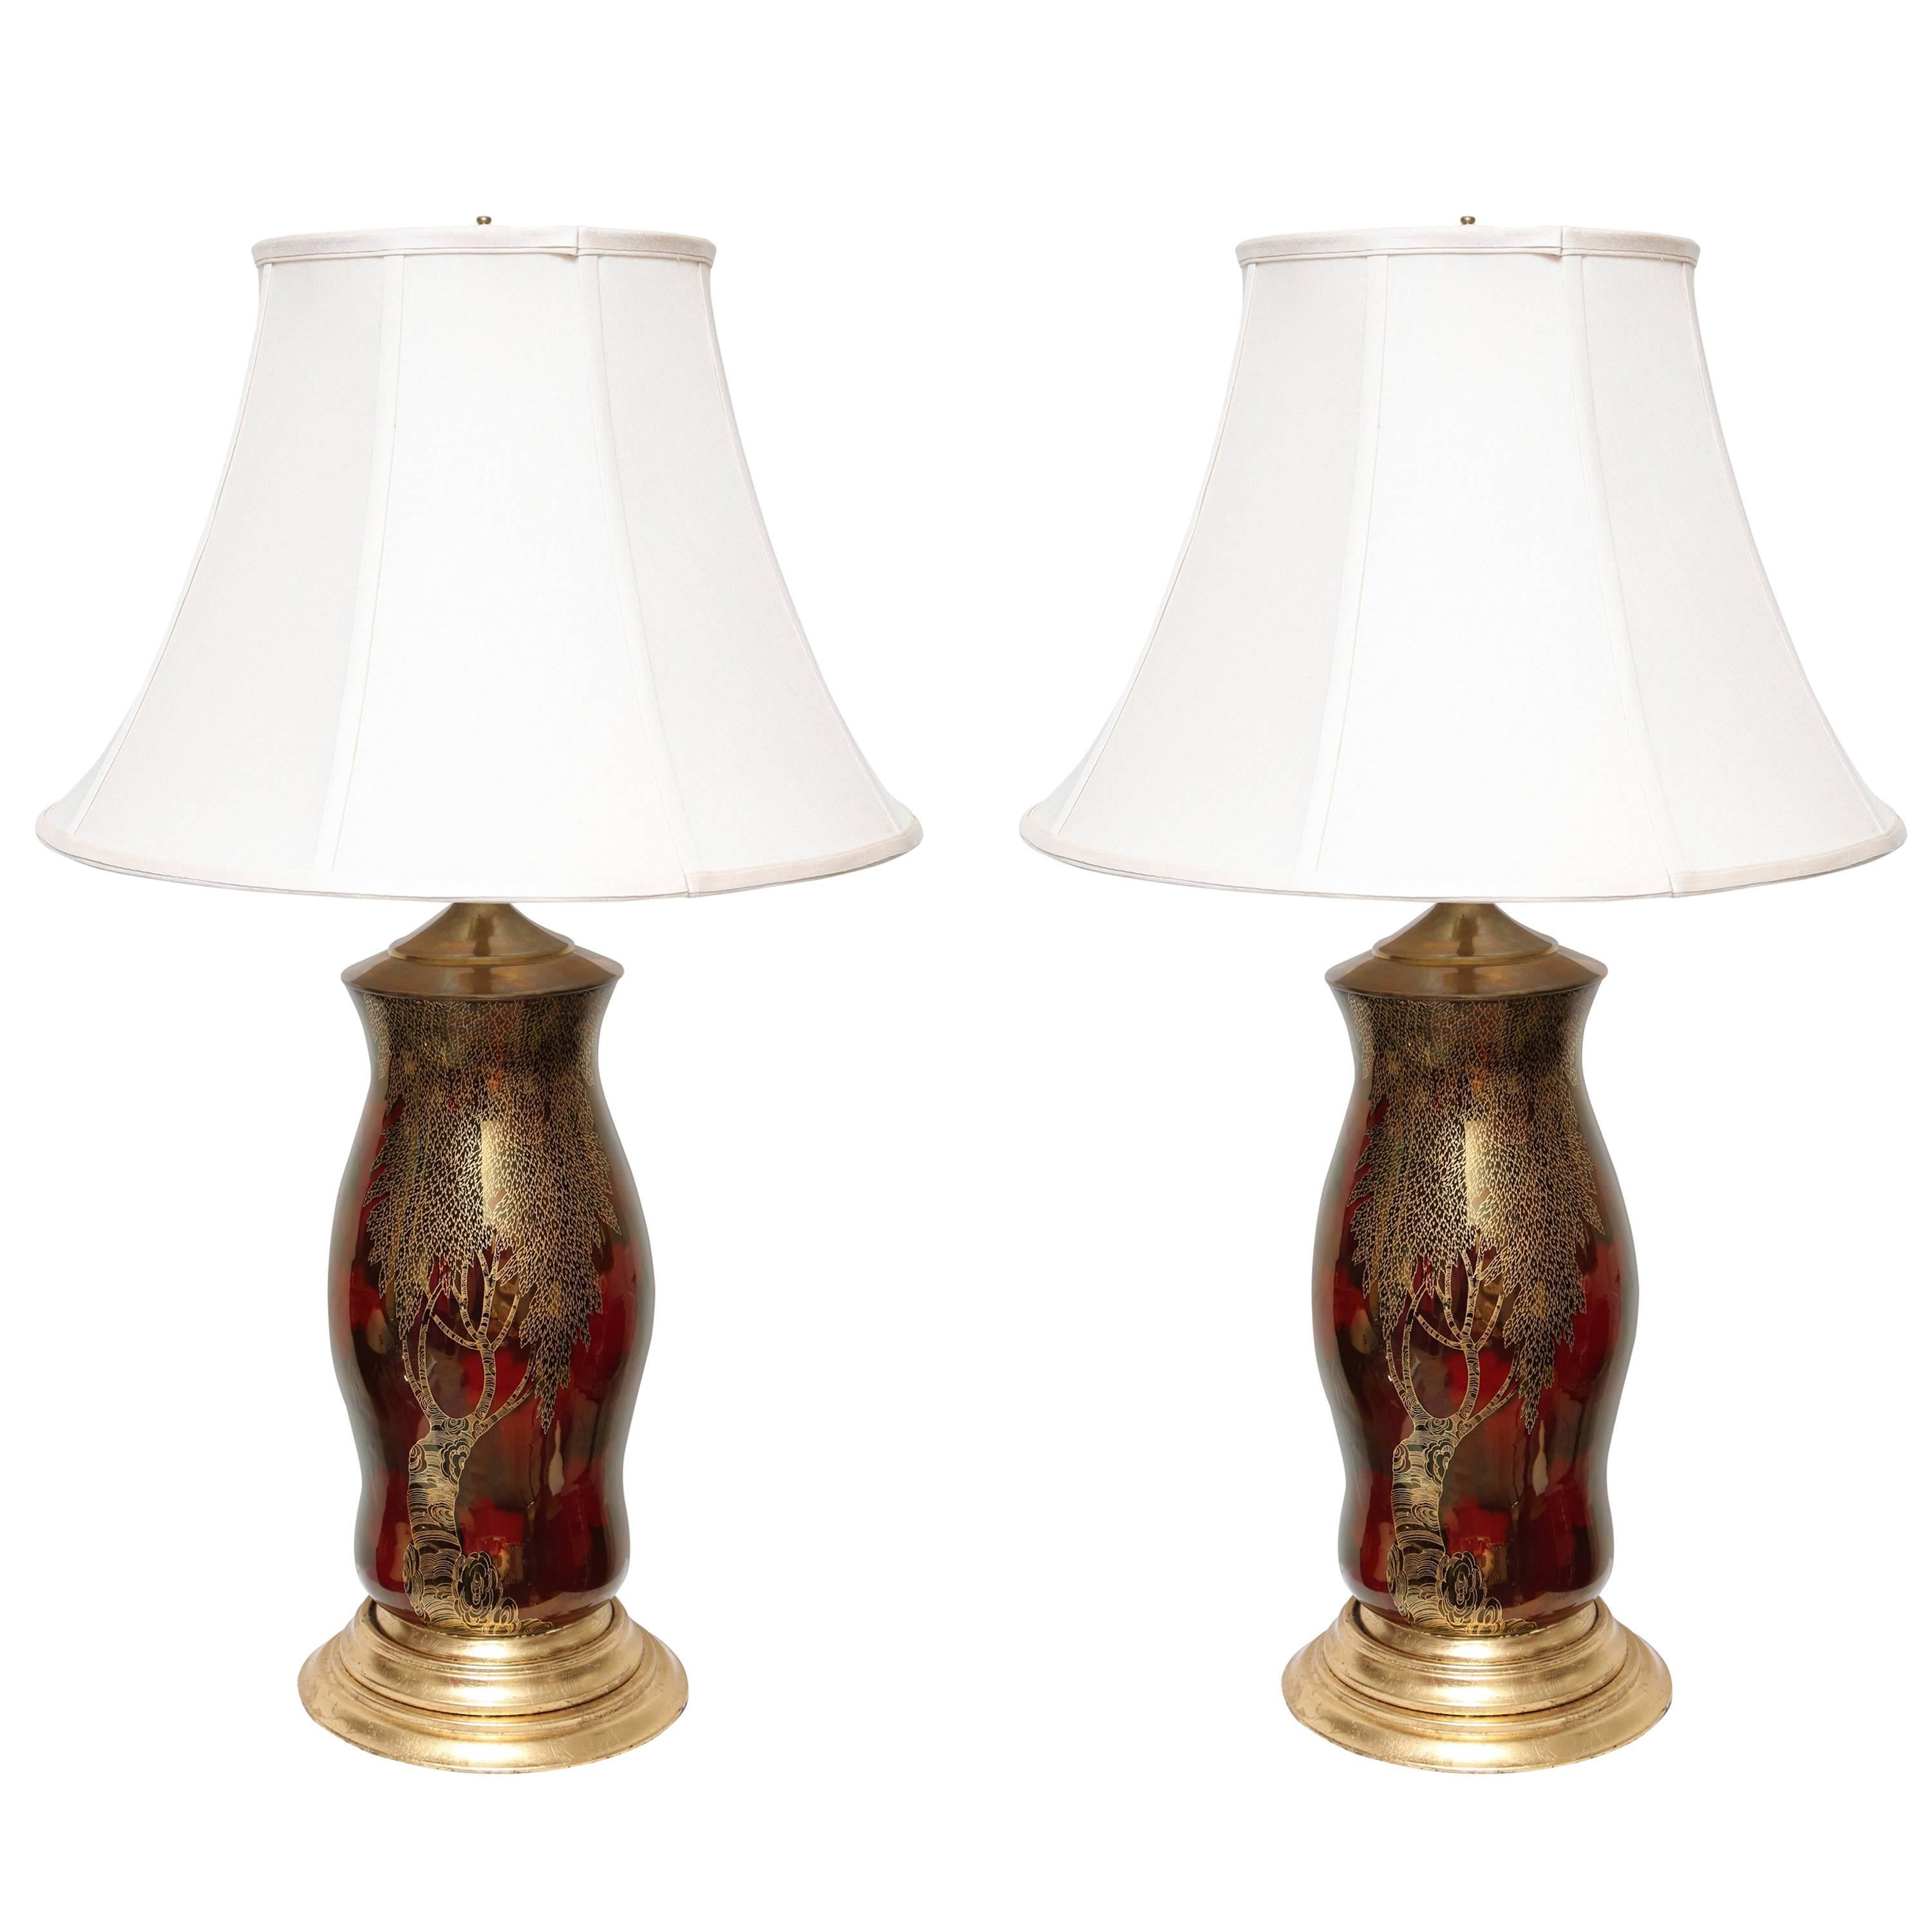 Pair of Oriental Style Decoupage Lamps